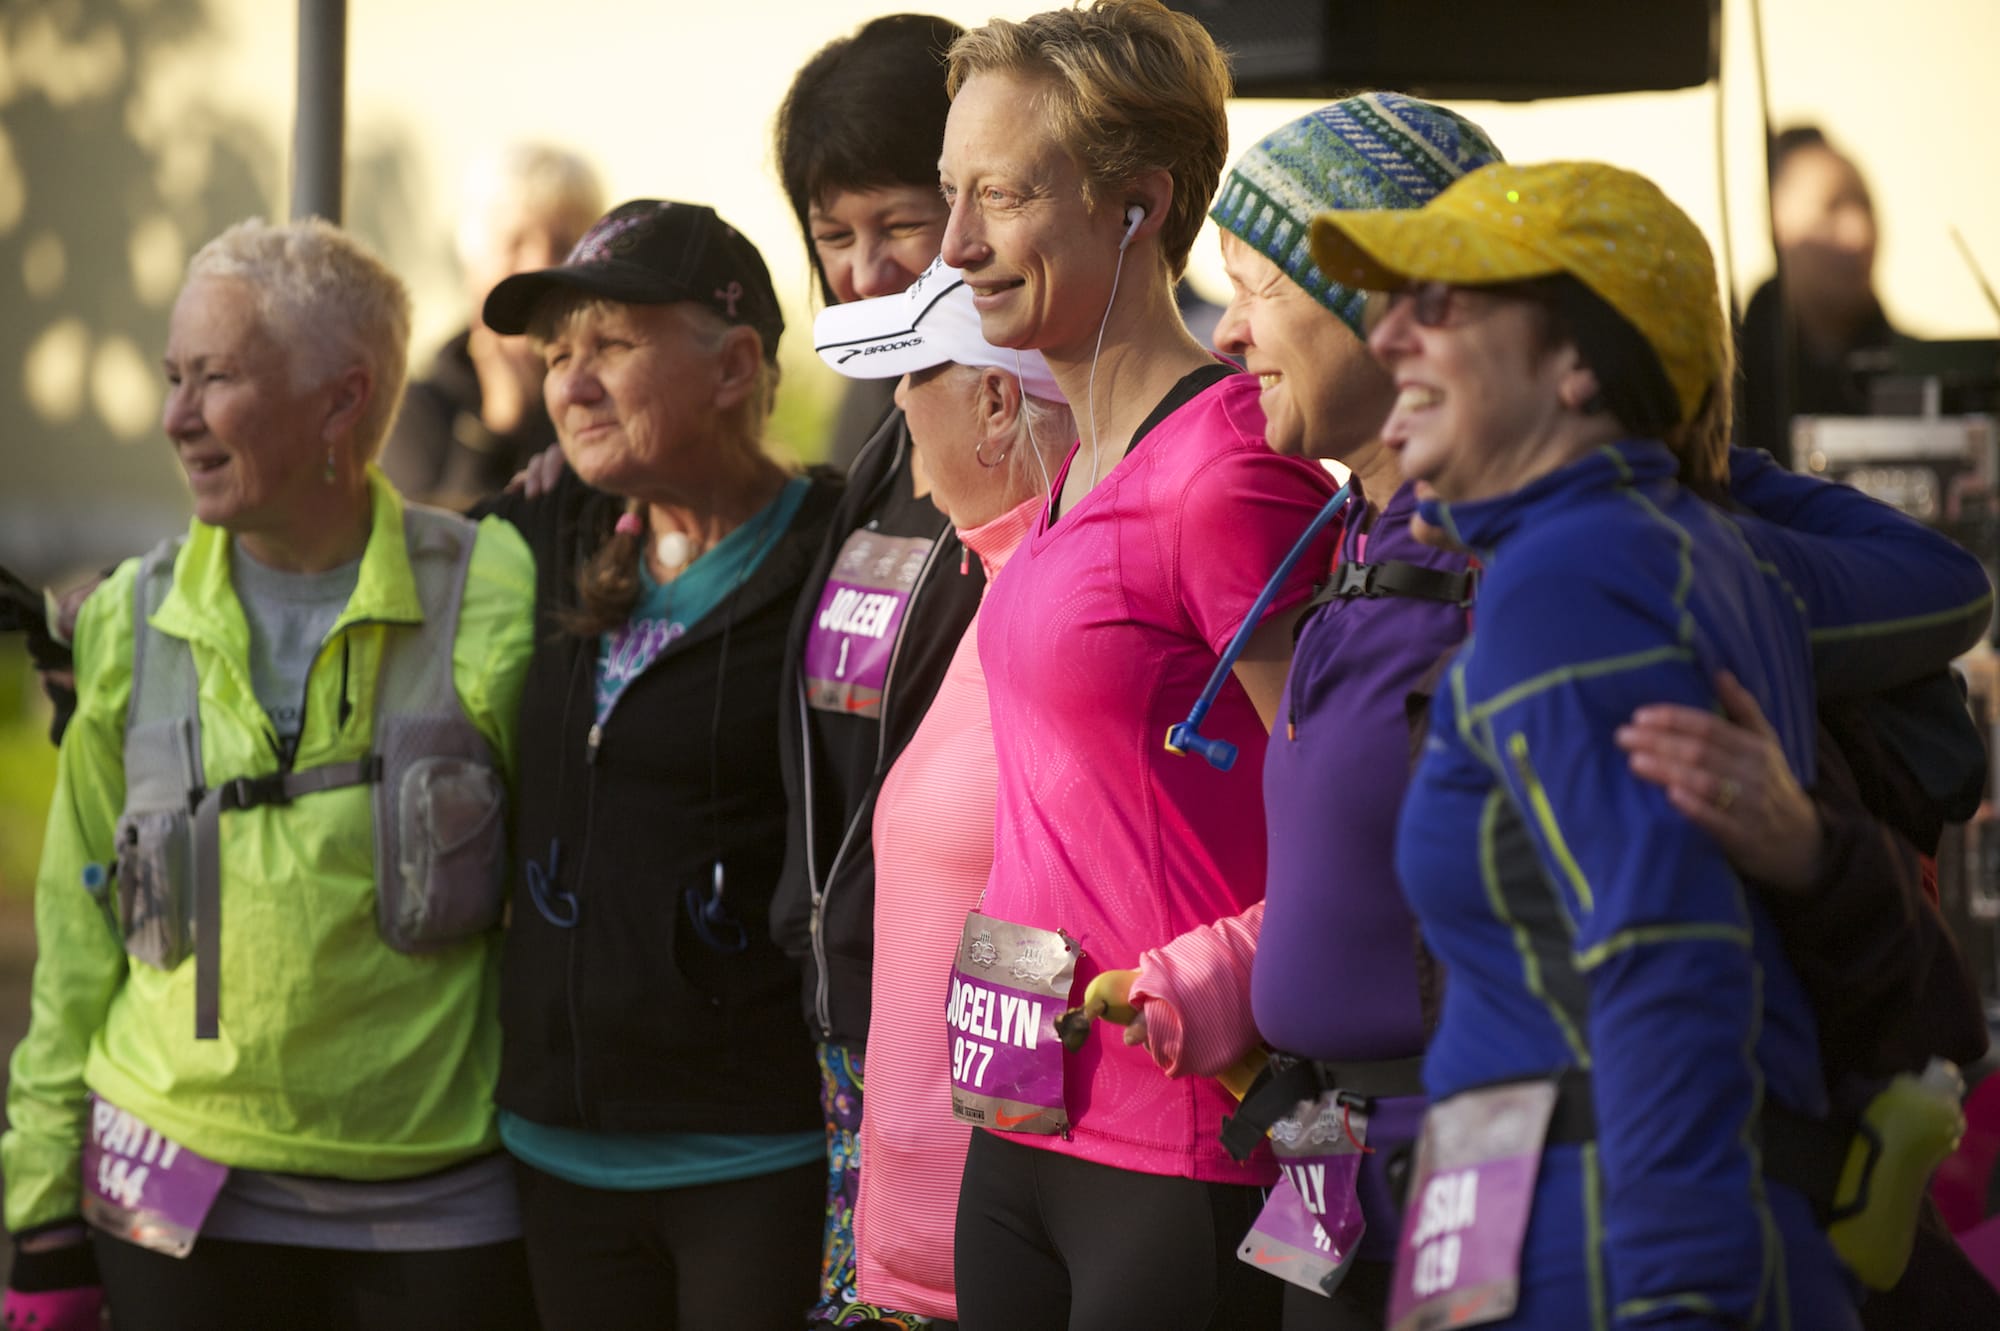 Cancer survivors pose for a photo before the start of the 7th annual Girlfriends Half Marathon in October.